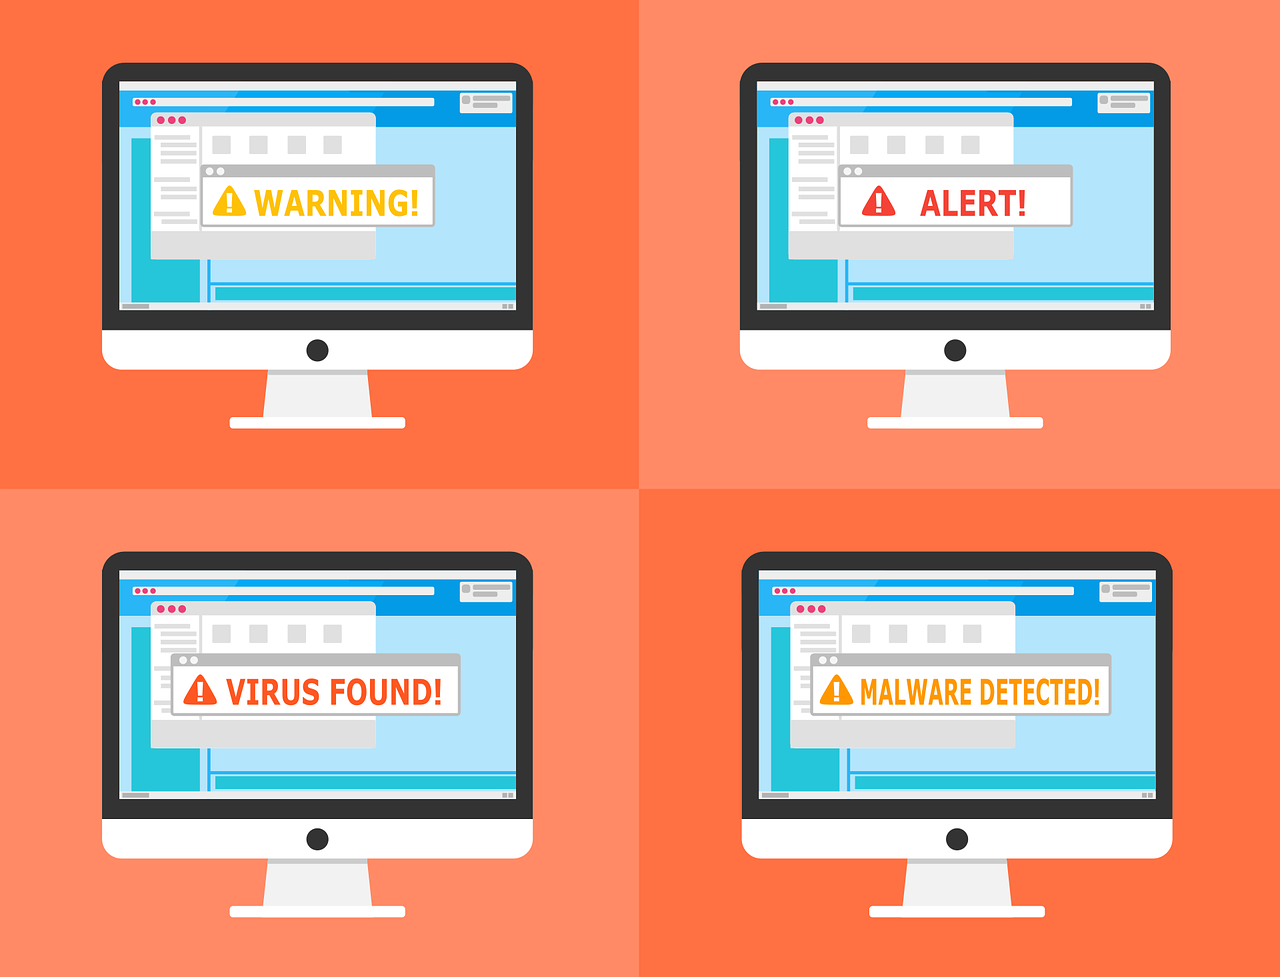 How to Recognize and Avoid Fake Virus and Malware Warnings